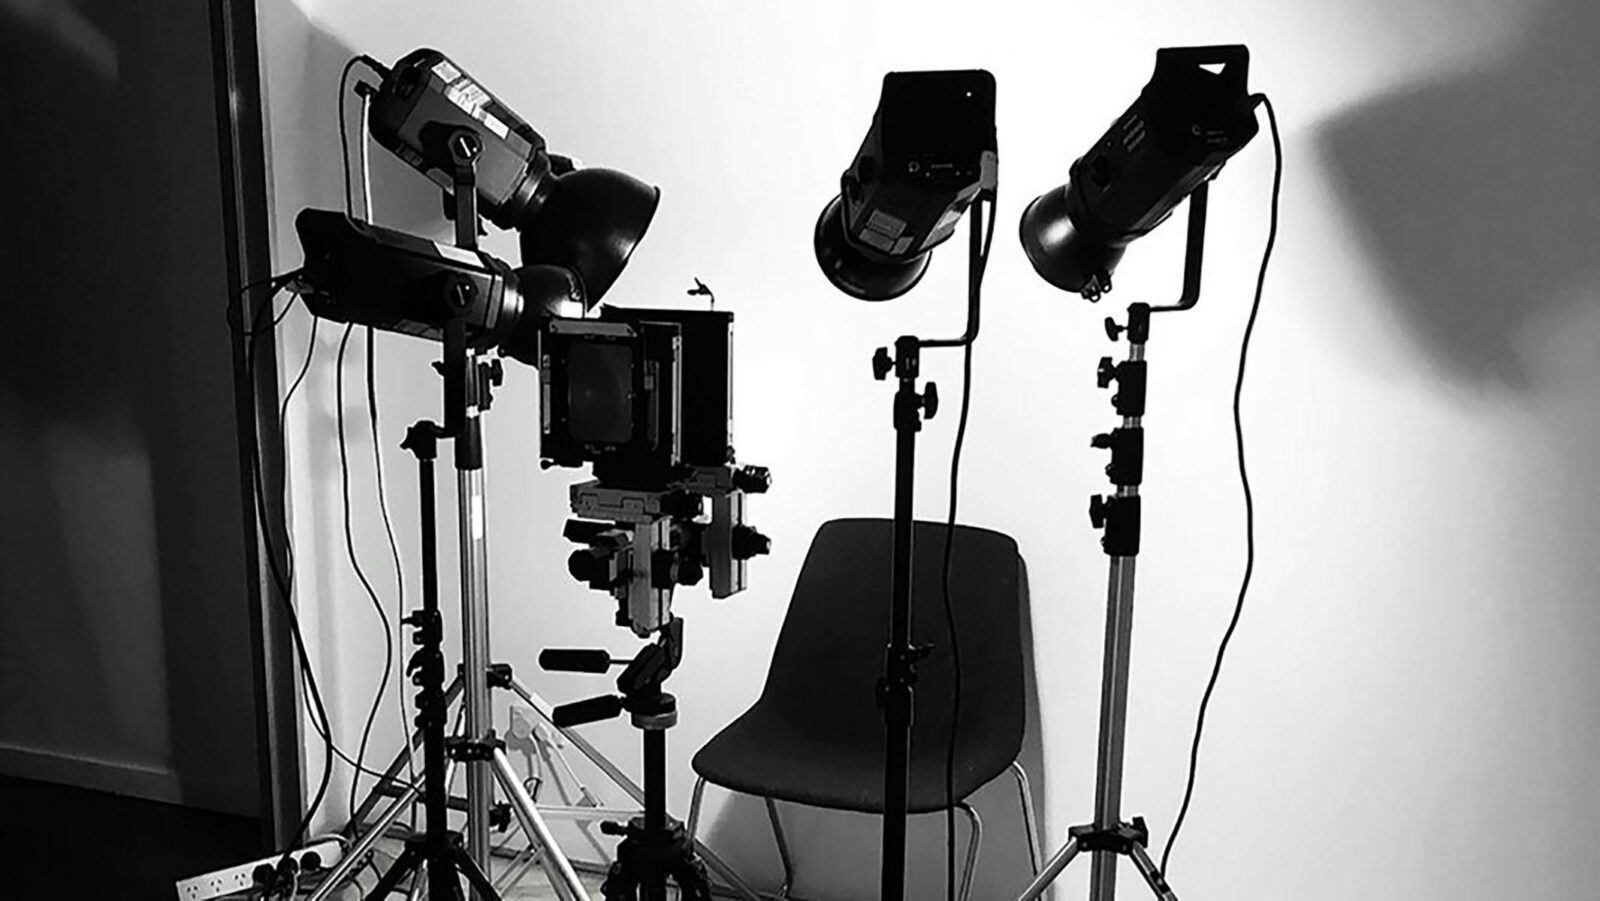 A photograph of a chair surrounded by studio lights and a camera